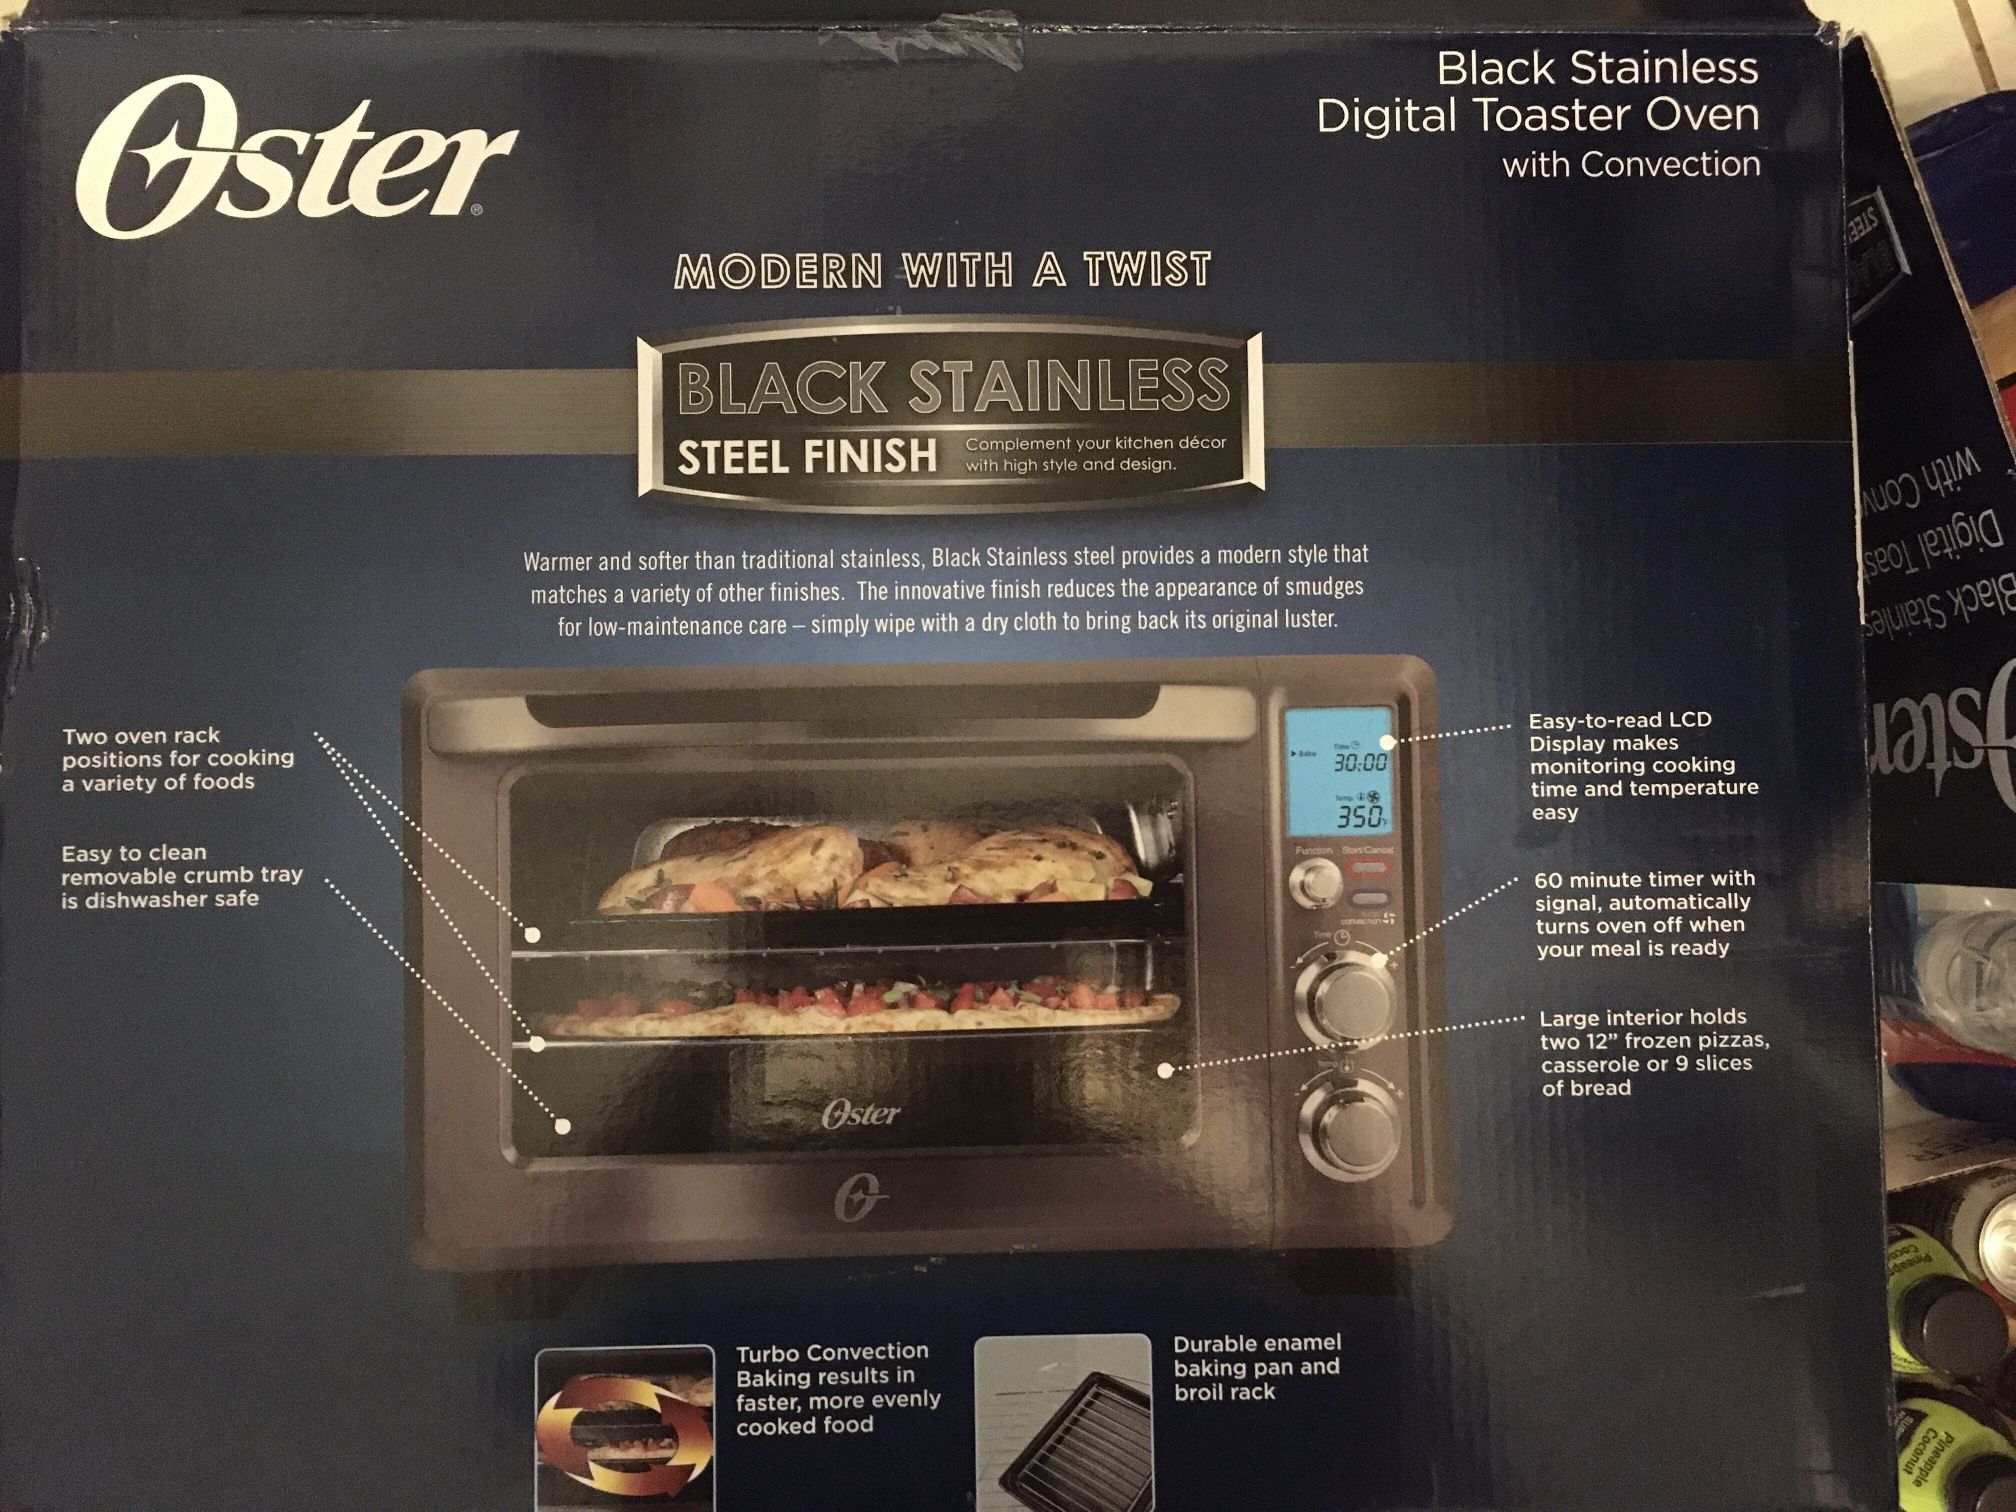 Oyster Digital Toaster Oven With Convection